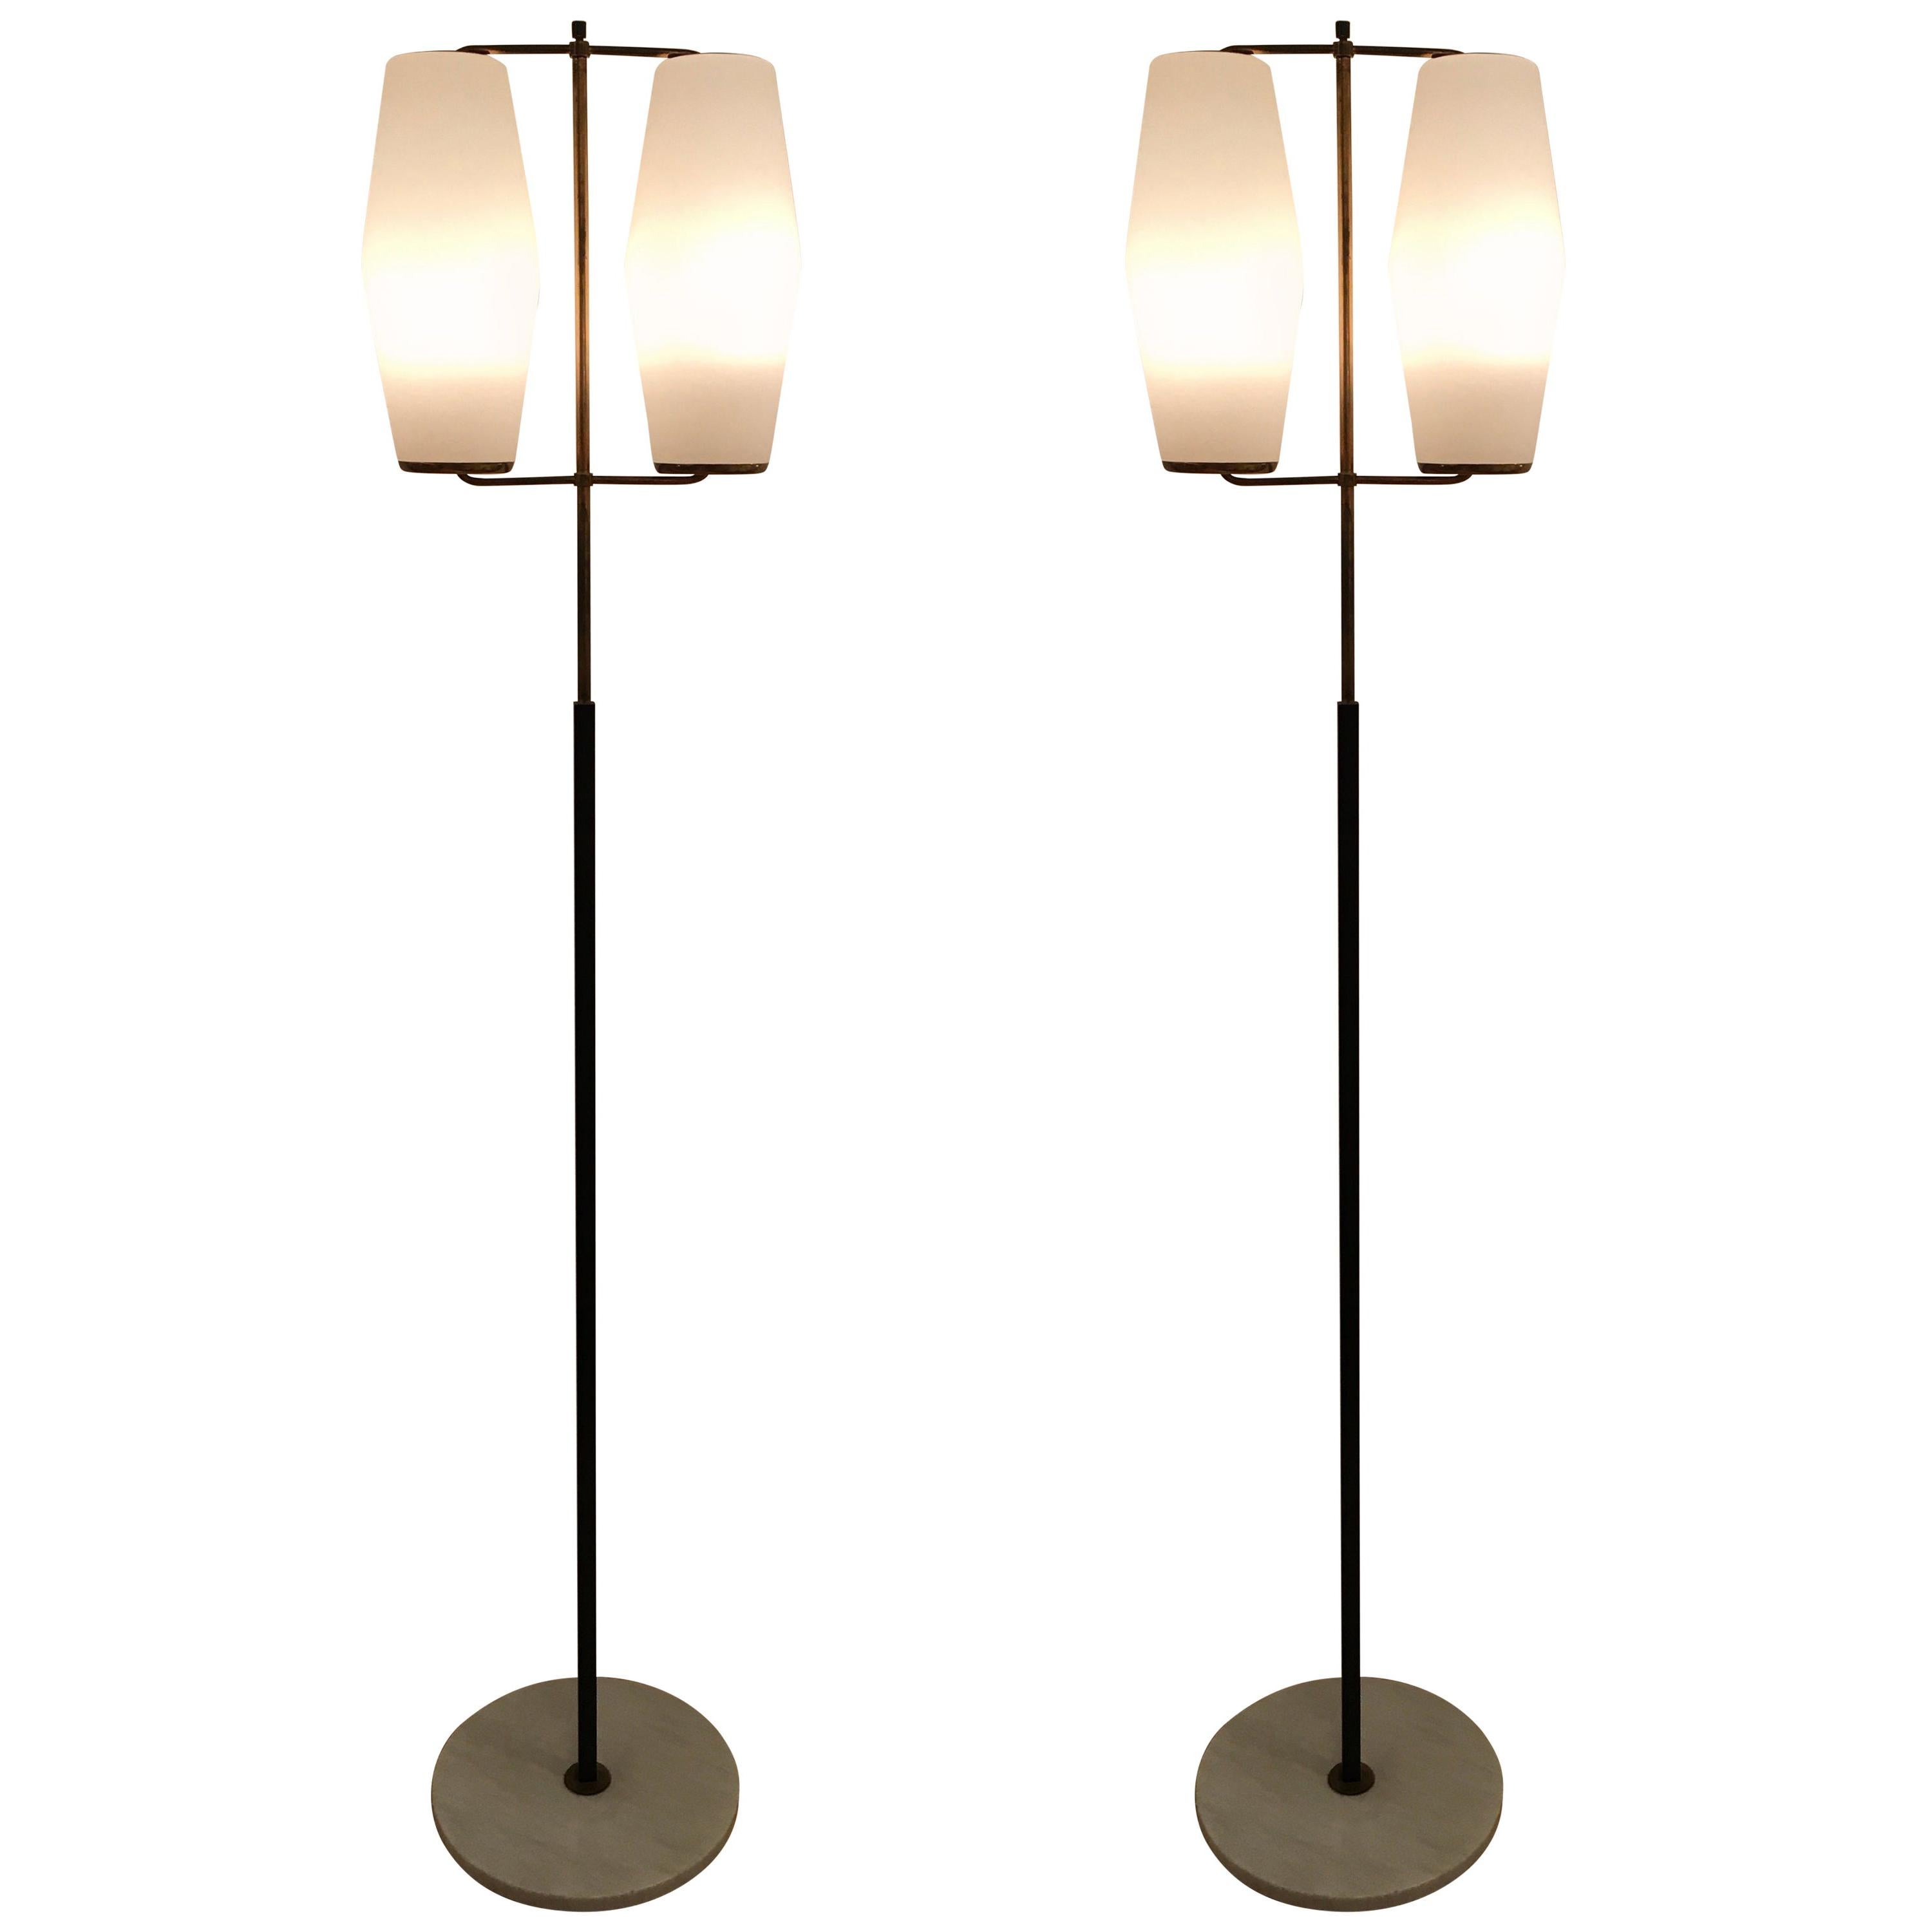 Pair of Brass and Opaline Midcentury Floor Lamps by Stilnovo, Italy, circa 1950